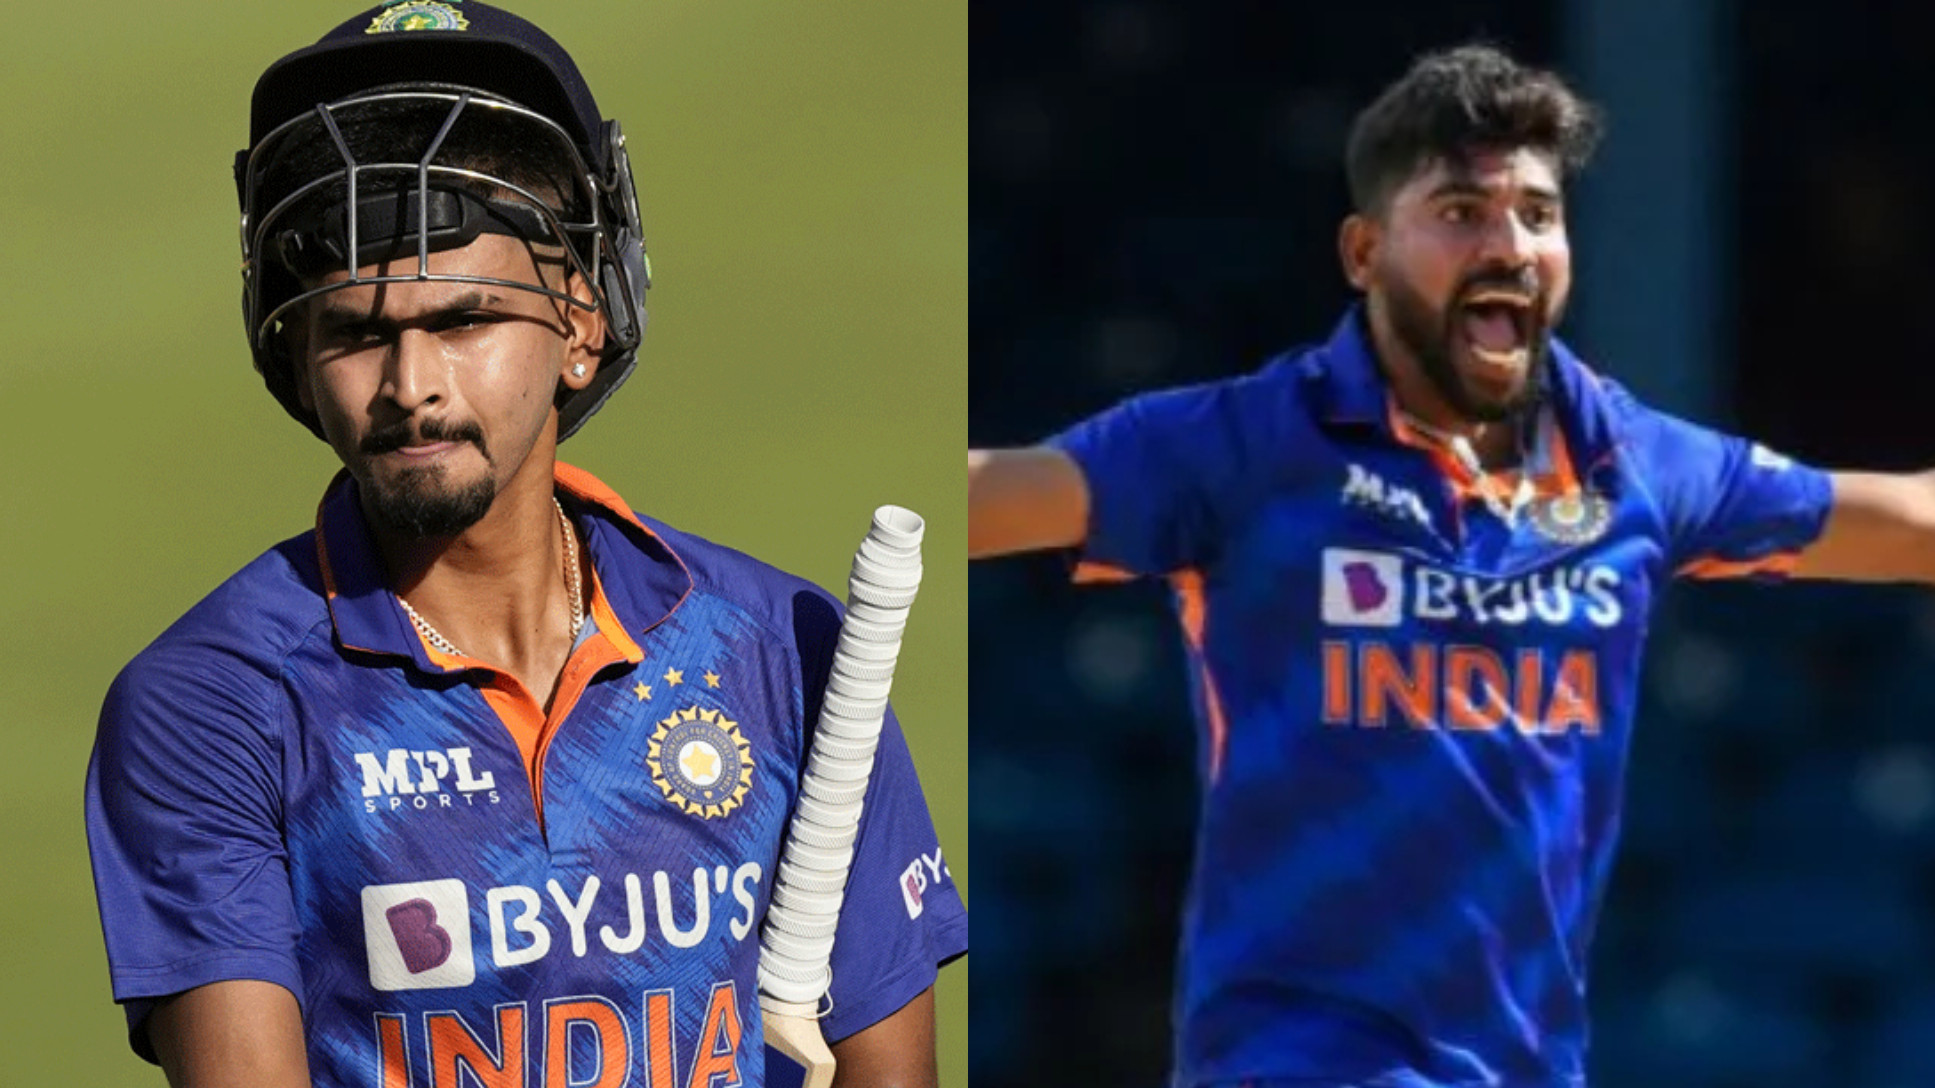 Shreyas Iyer and Mohammed Siraj included in ICC ODI Men’s Team of the Year 2022